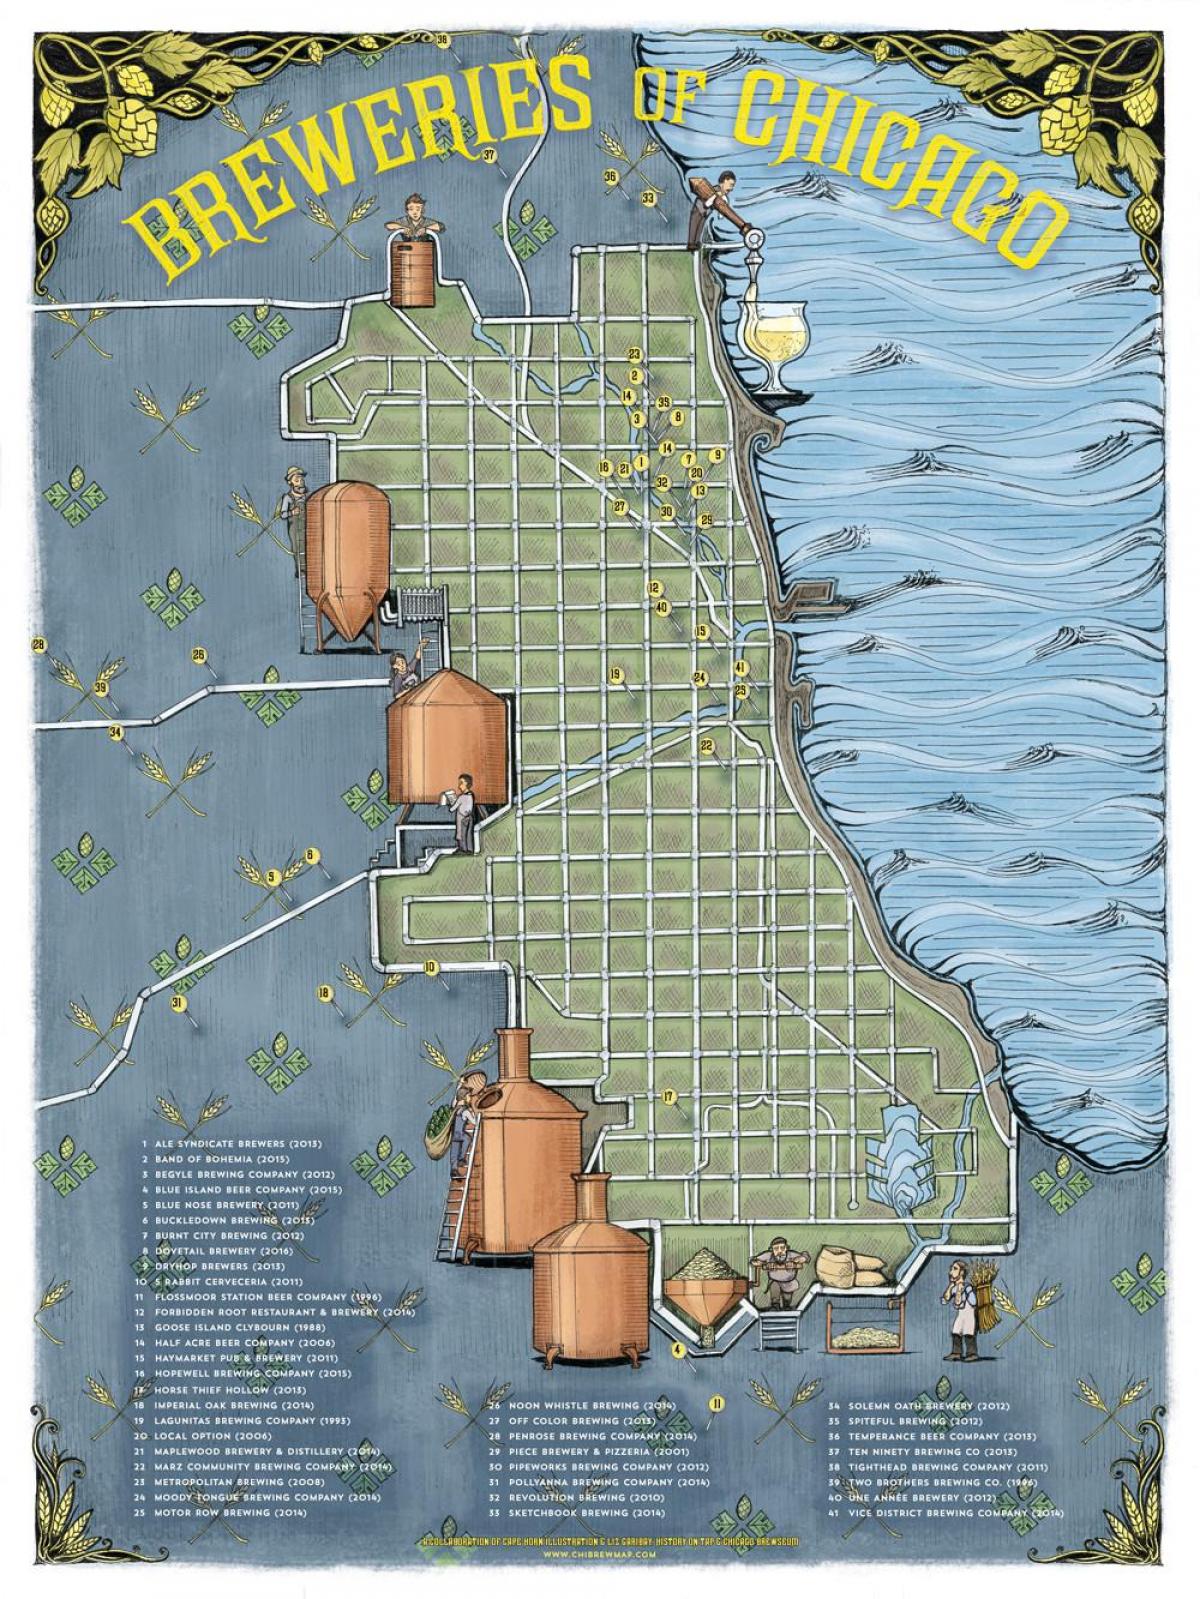 Chicago beer mapa